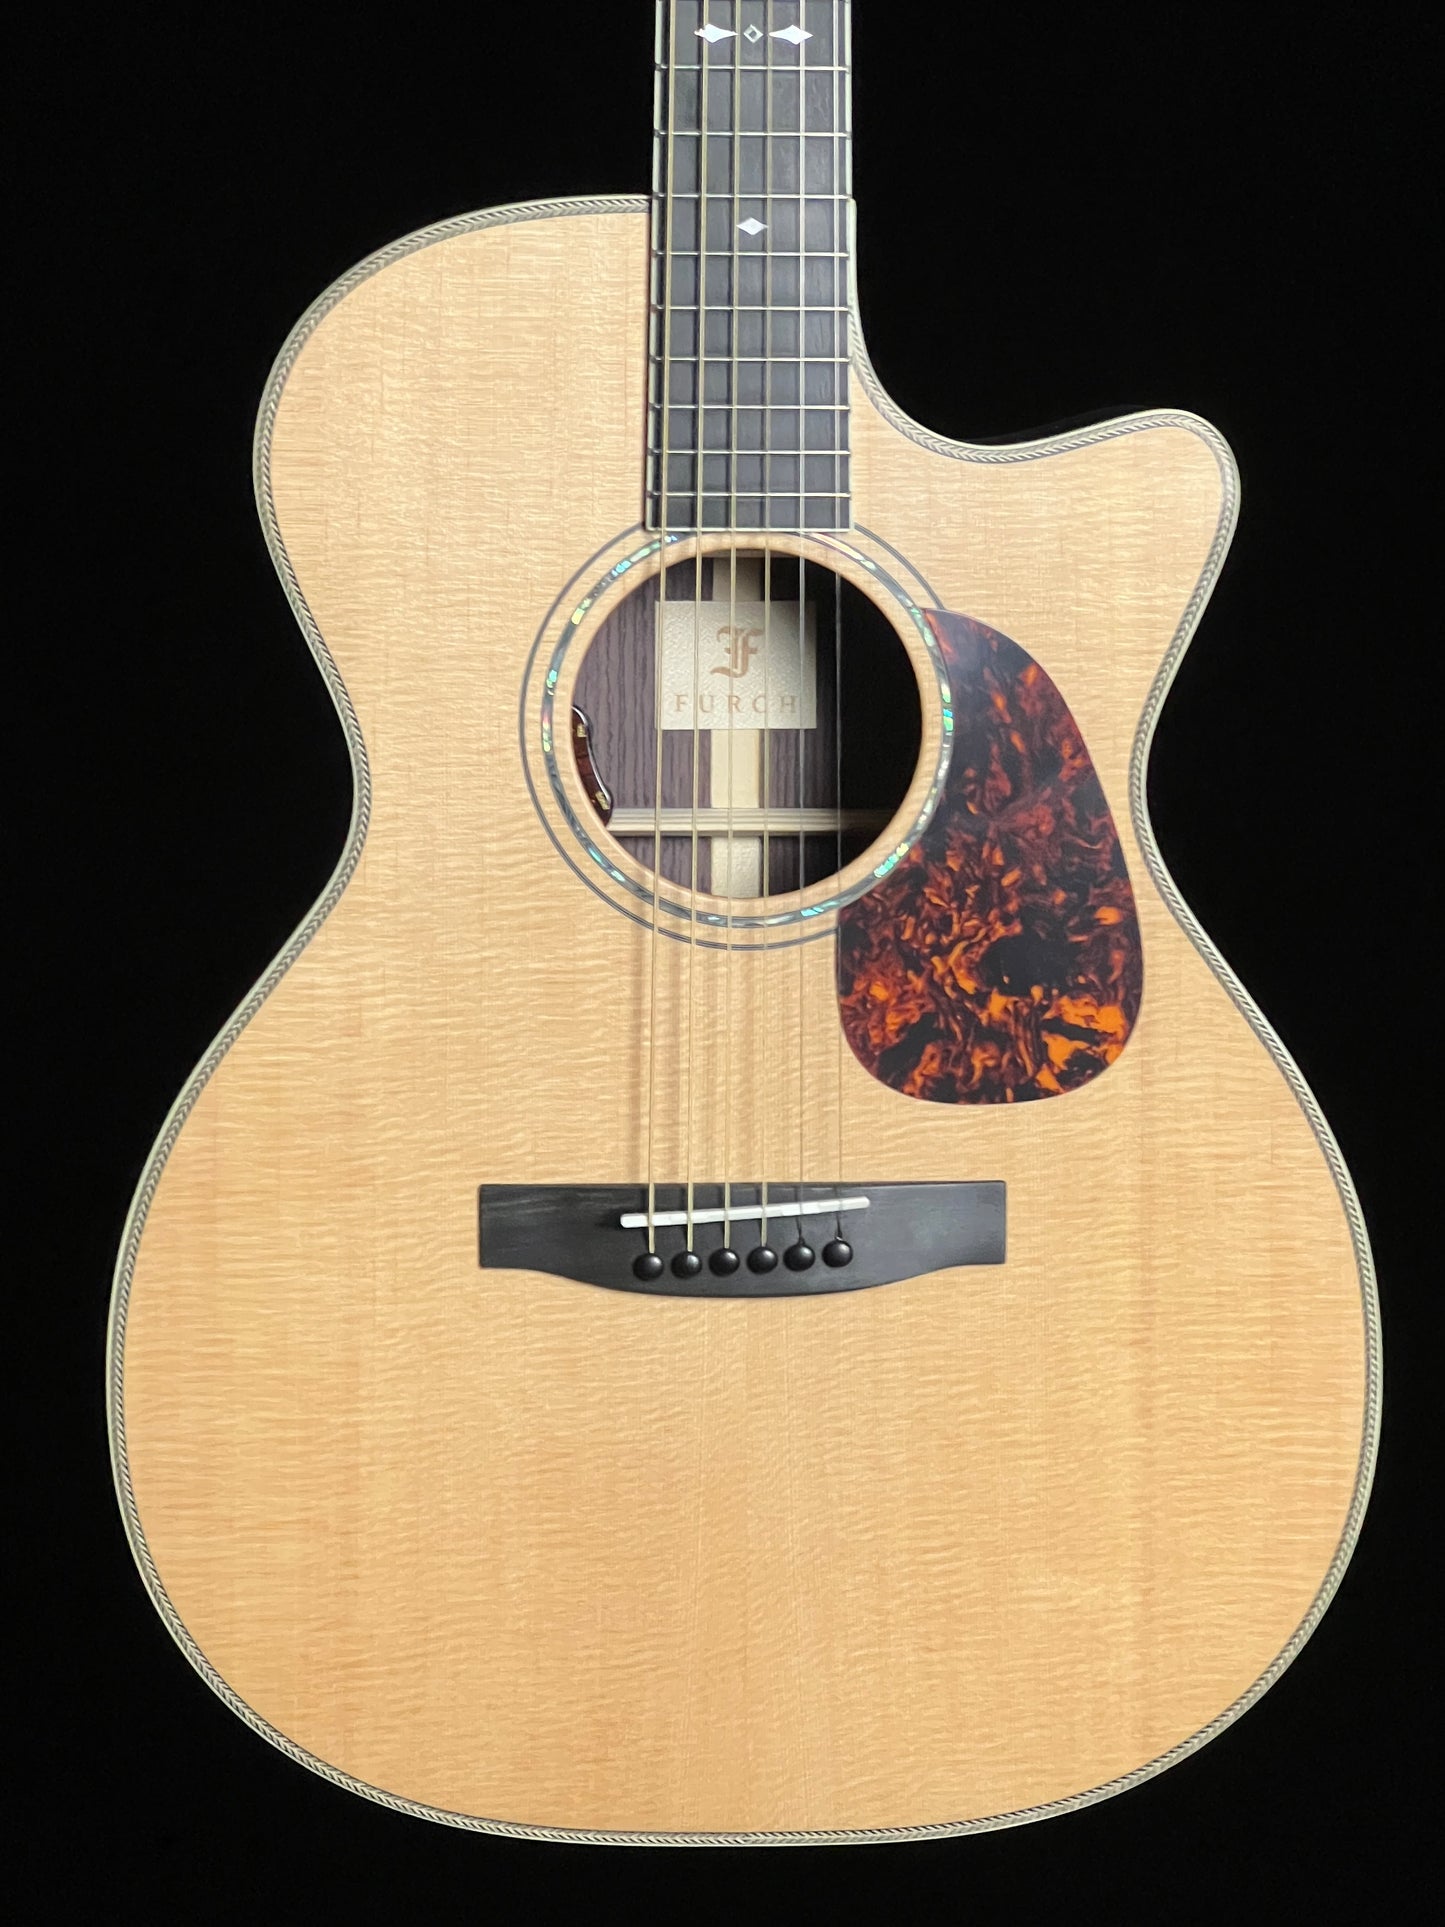 Furch Vintage 2 OMc-SR Sitka Spruce/Indian Rosewood OM Cutaway Acoustic Guitar with LR Baggs - New